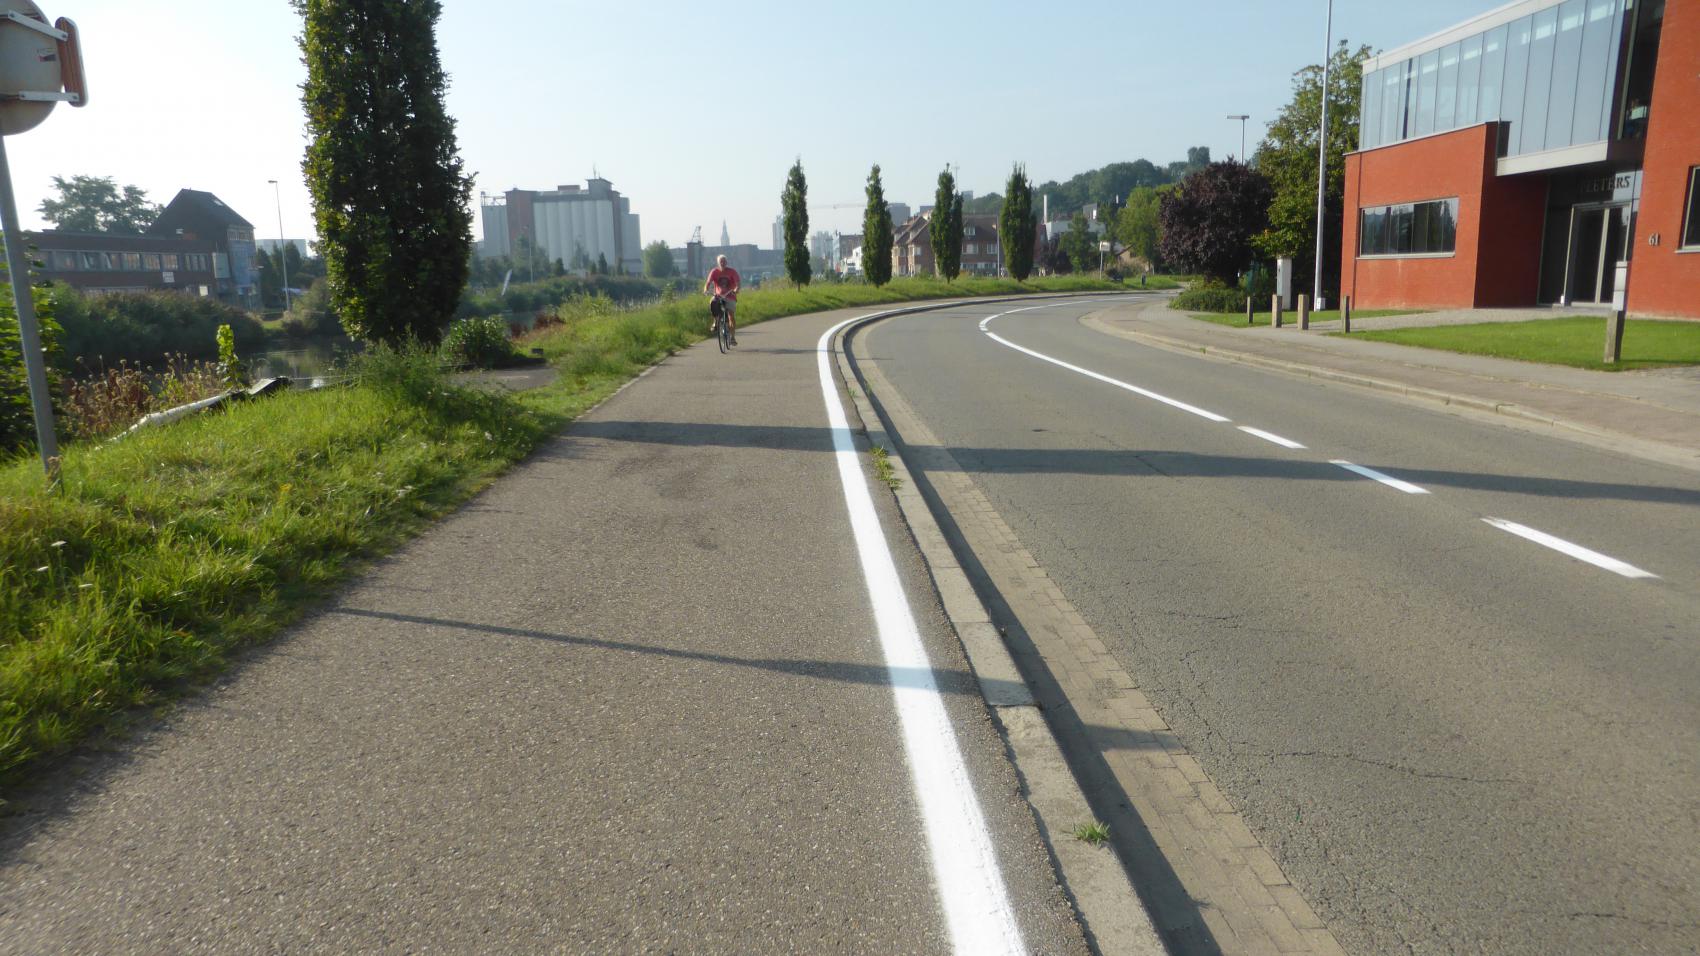 Edge marking denotes a buffer zone between cycle path and carriageway. F3 entering Leuven.